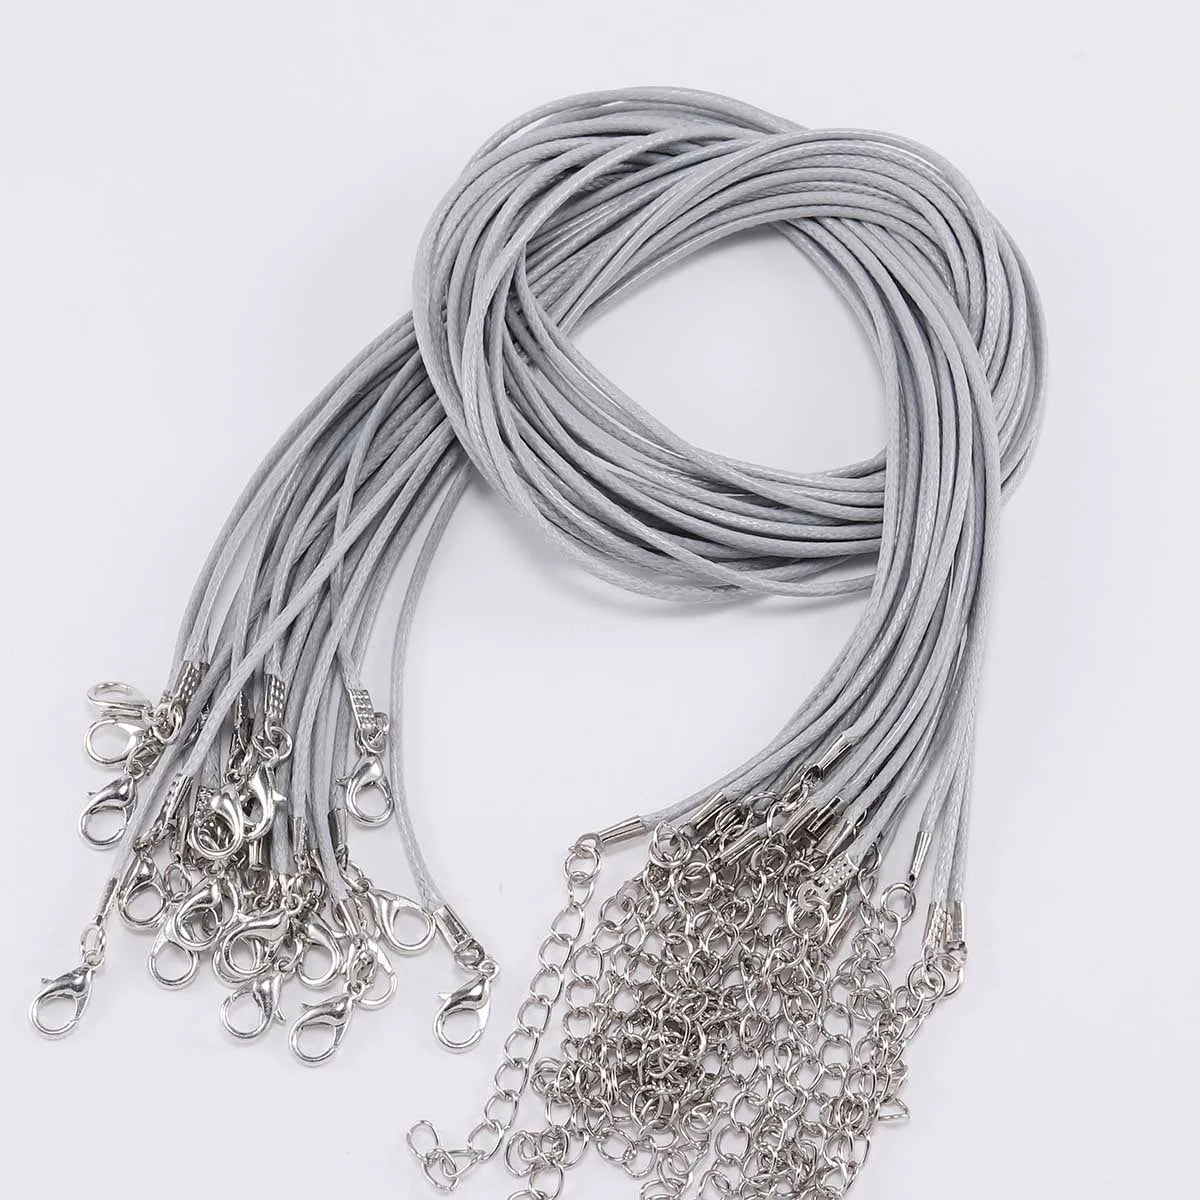 10Pcs/lot Dia 1.5/2mm Leather Cord Necklace With Clasp Adjustable Braided Rope for Jewelry Making DIY Necklace Bracelet Supplies